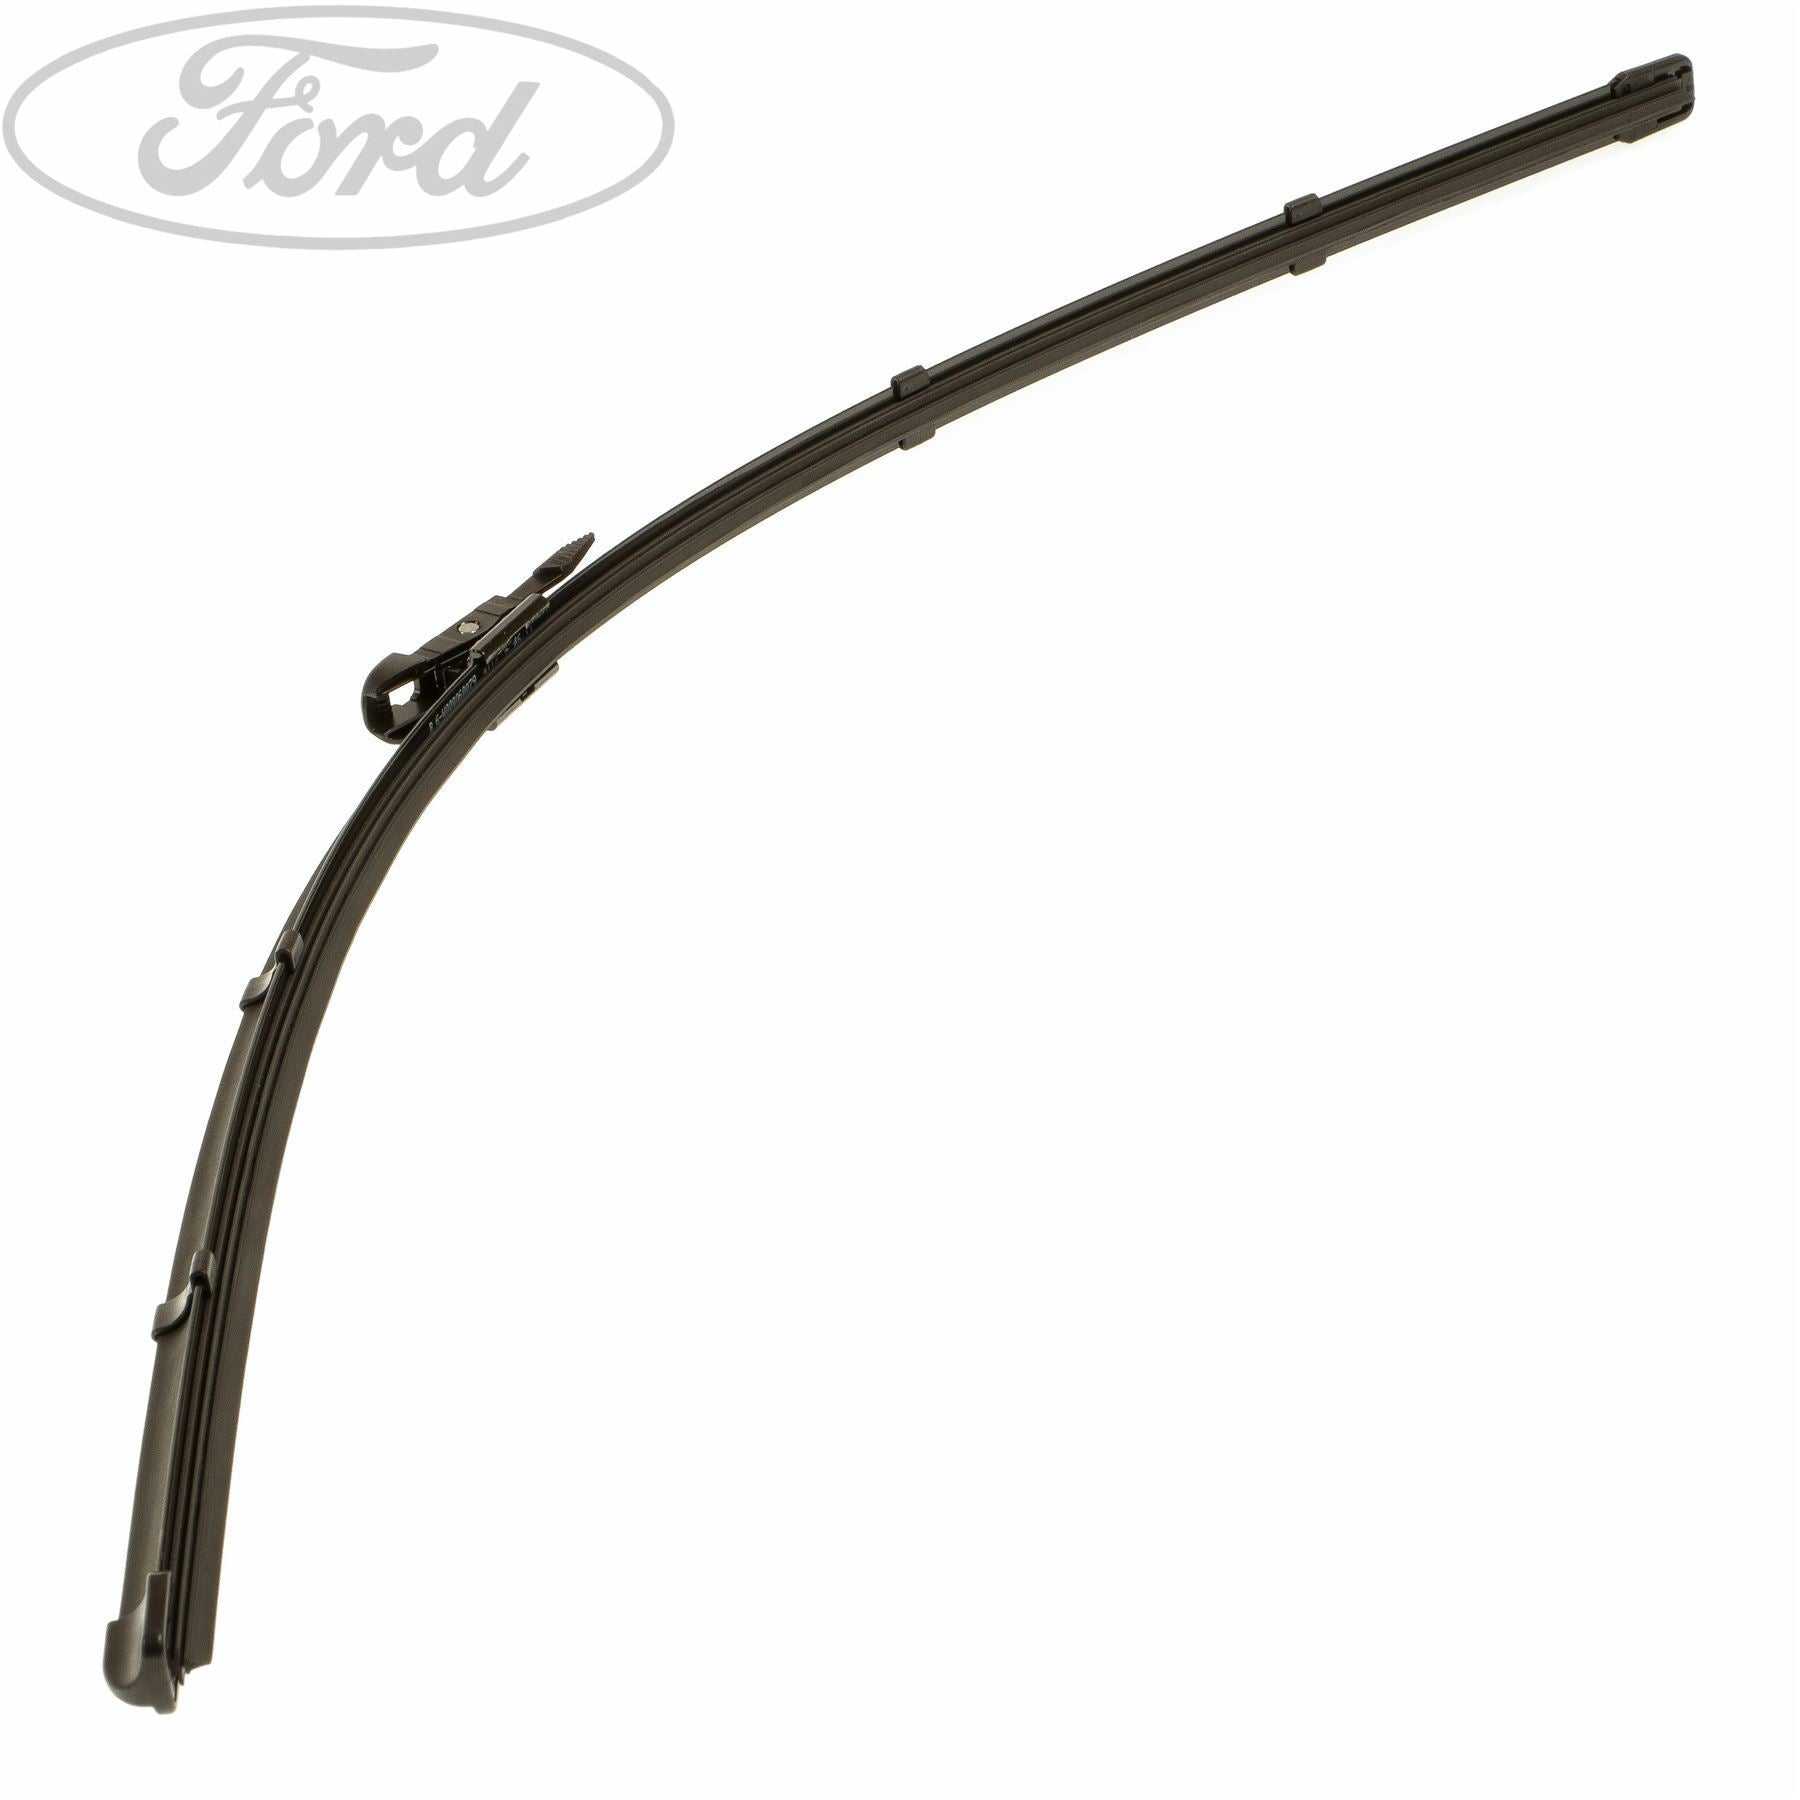 Ford, TRANSIT CONNECT N/S LH FRONT WIPER BLADE FLAT AERO BLADE